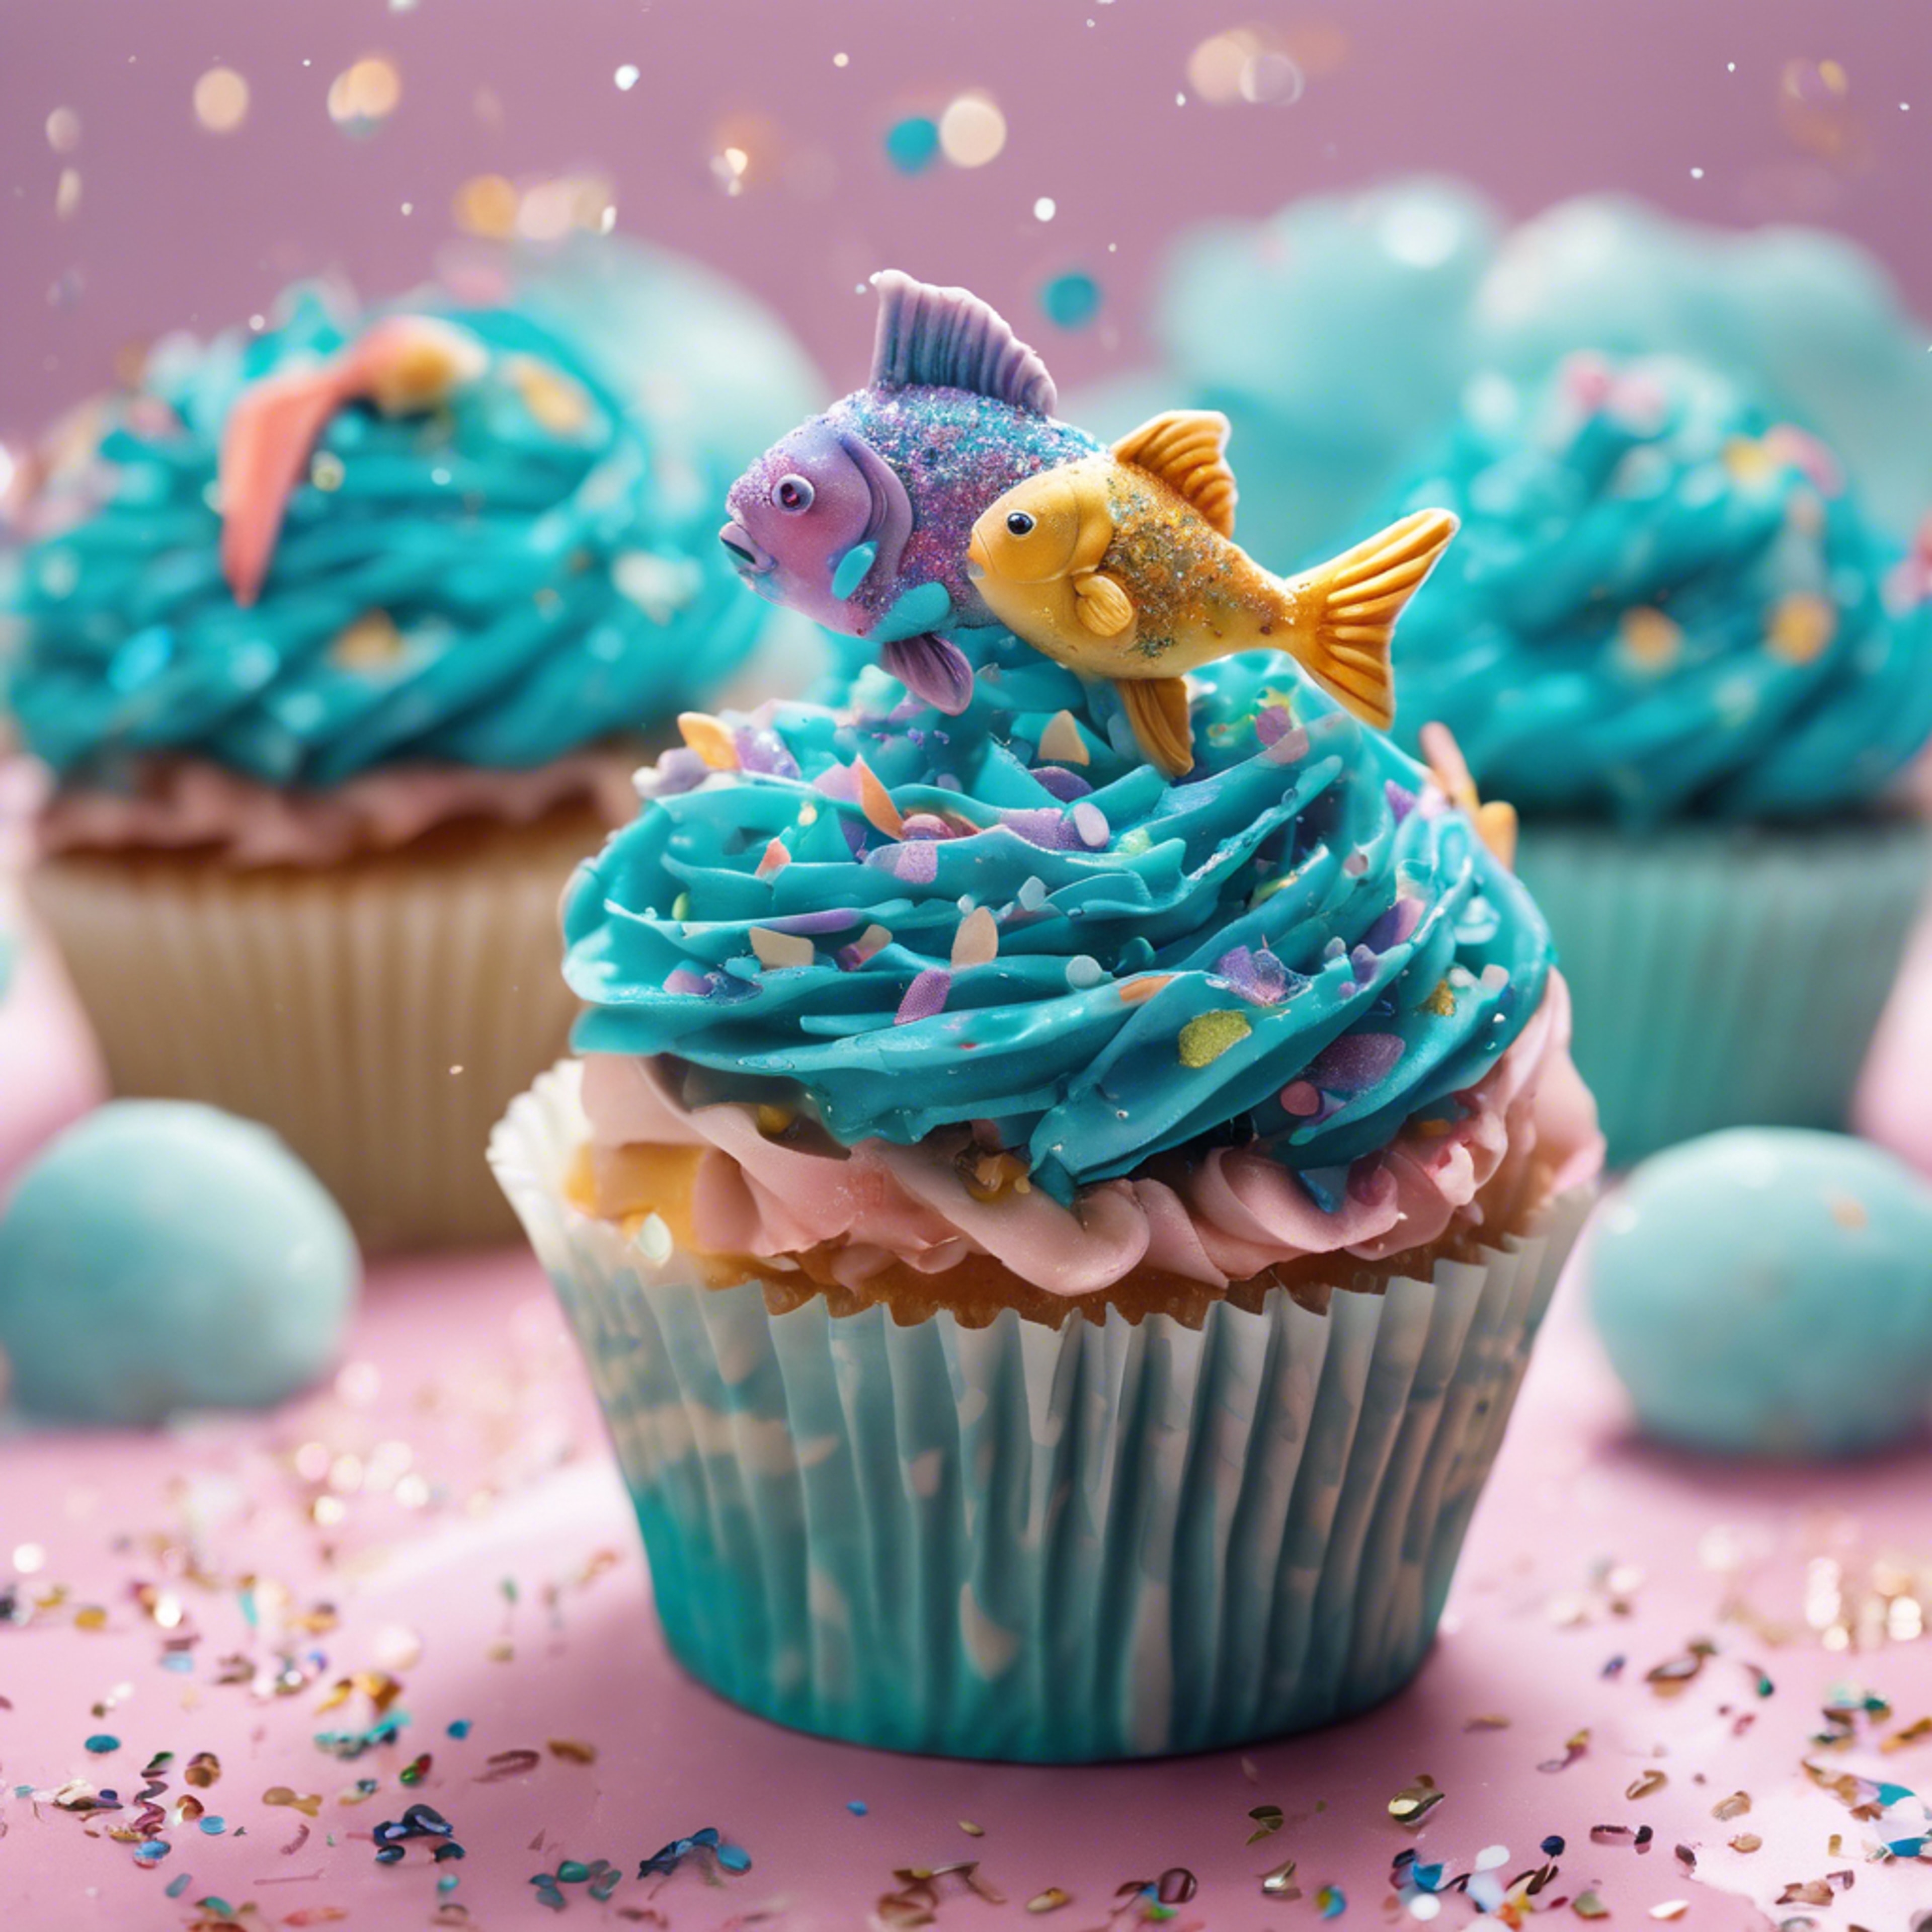 A whimsical Pisces-themed cupcake, with decorative icing representing two cute fish swimming in a sea of sprinkles. 牆紙[694d5145c111483cb550]